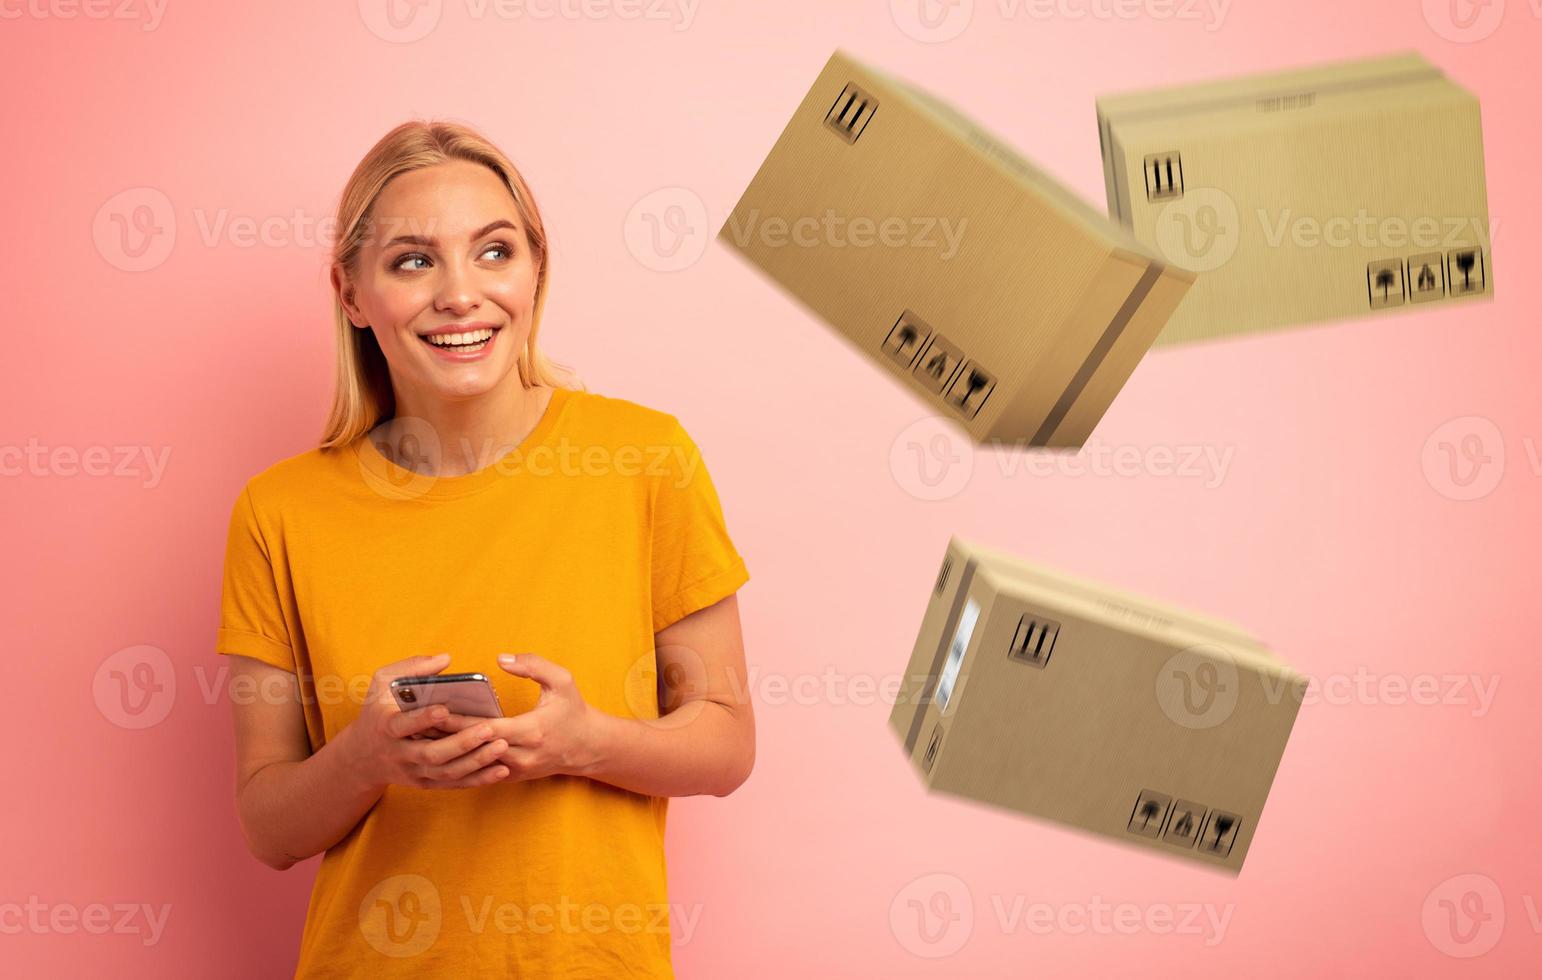 Blonde cute girl receives priority fast boxes from online shop order. Surprised and amazed expression. Pink background photo